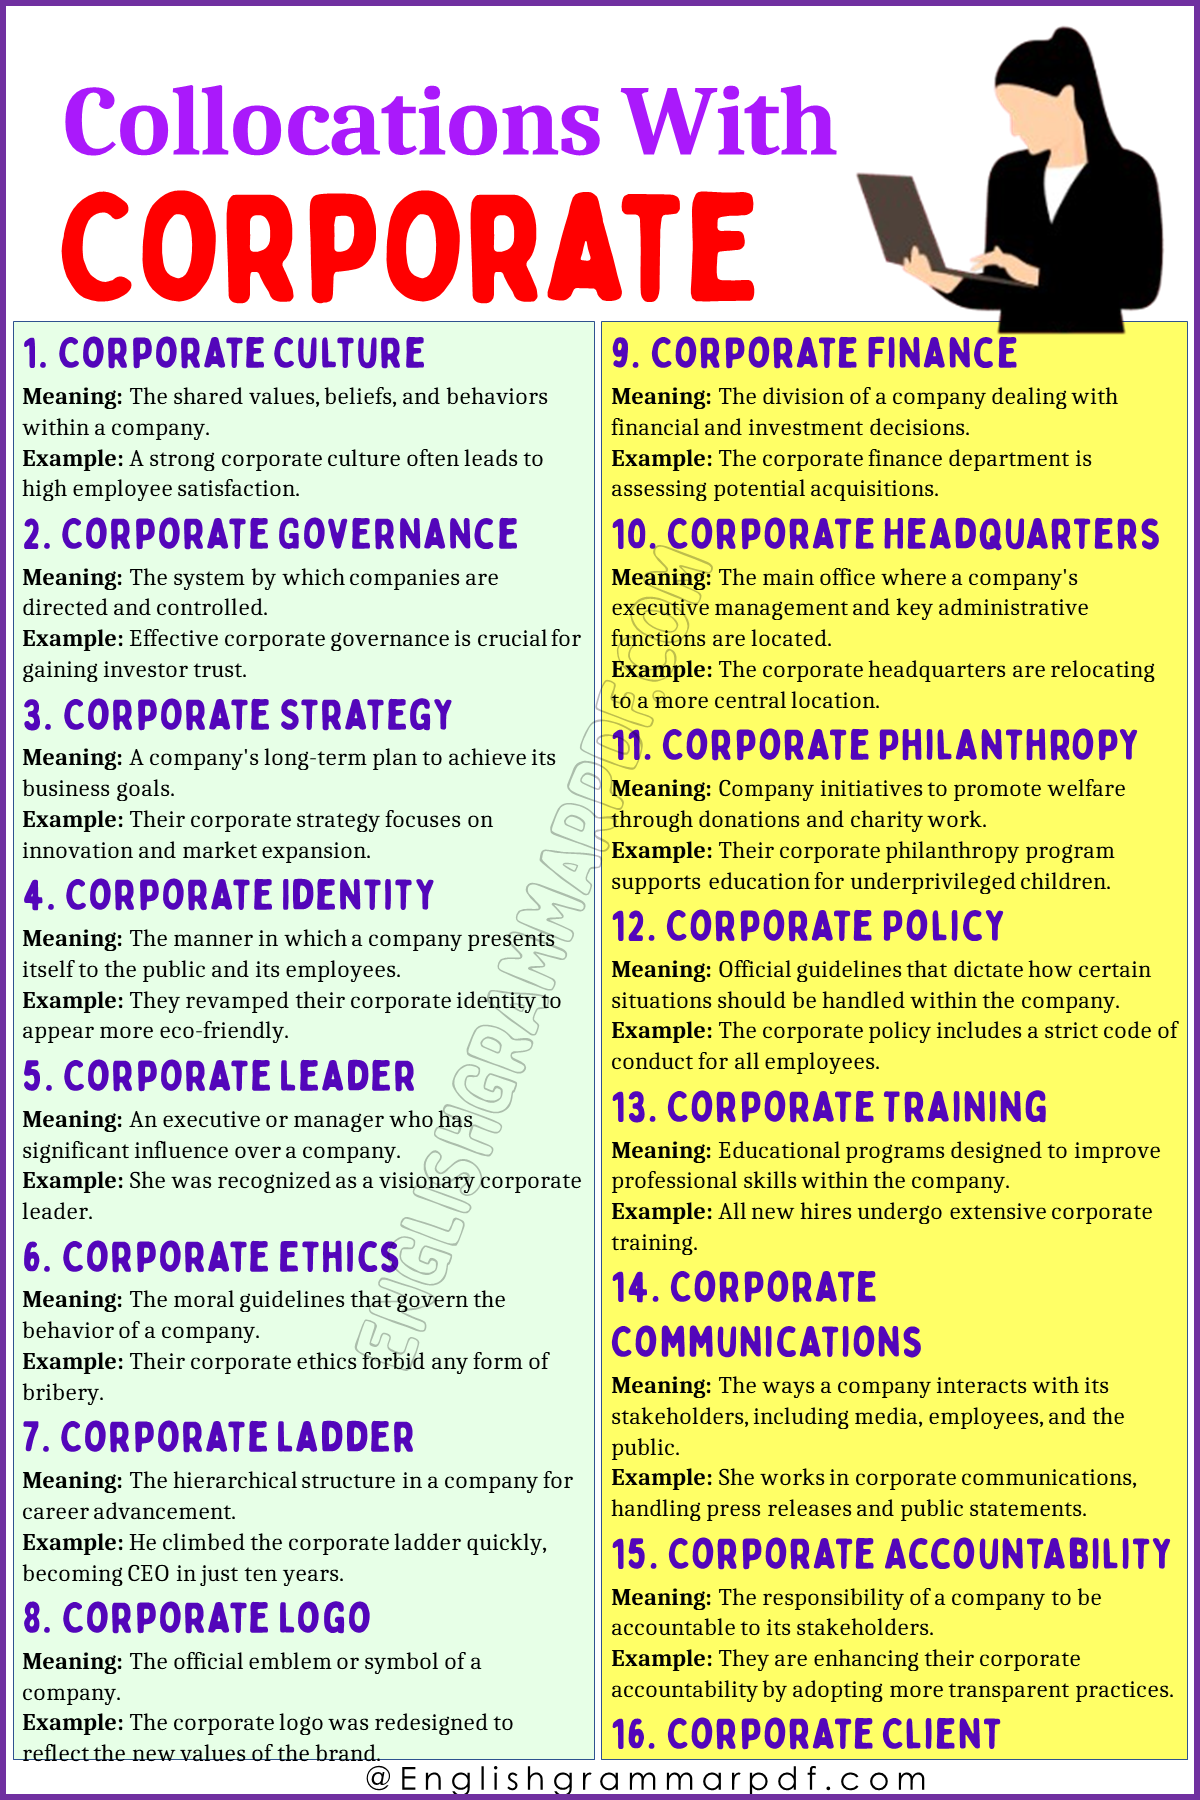 Collocations with Corporate